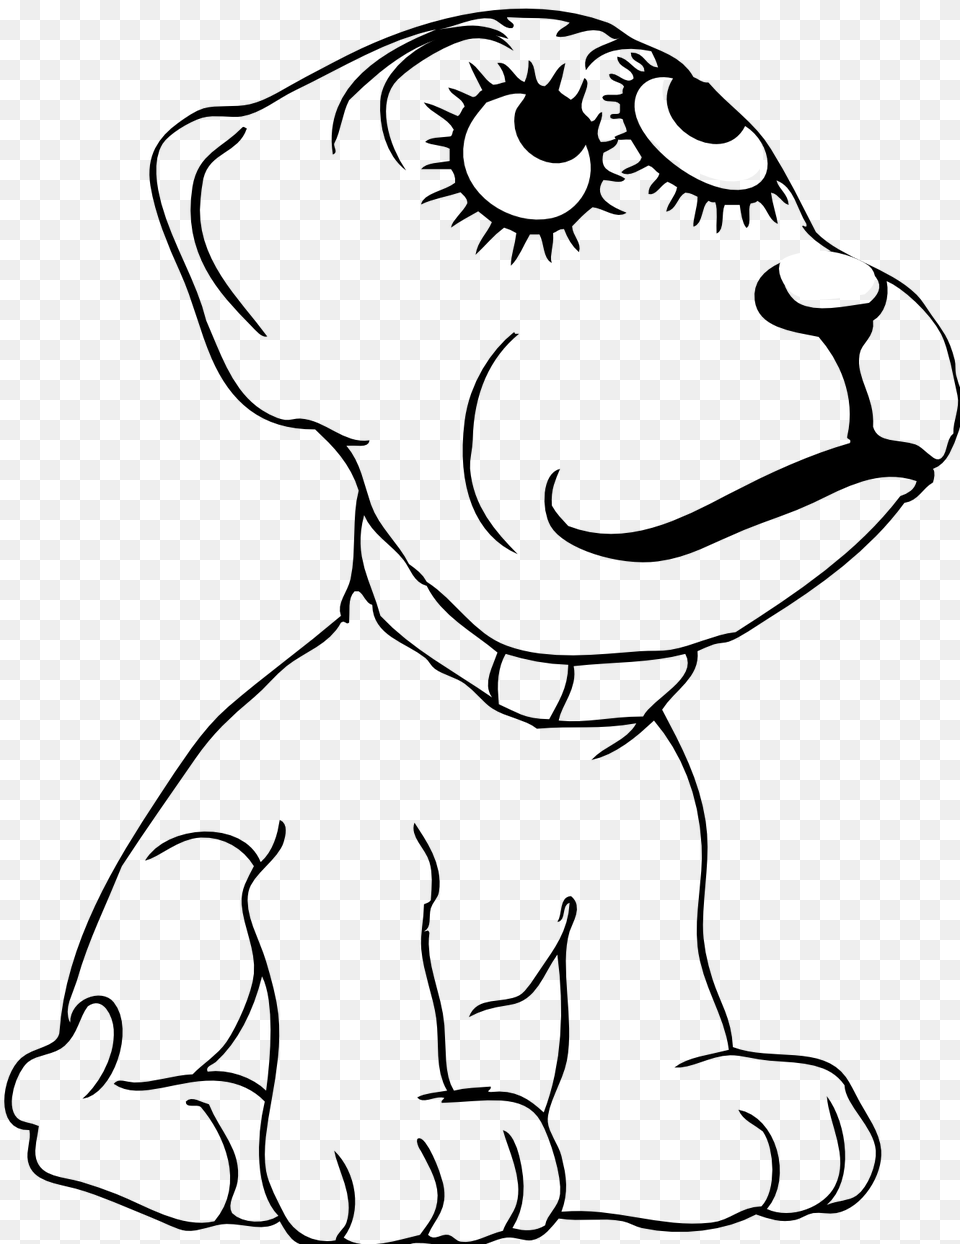 Black And White Dog Cartoon Gallery Images, Baby, Person, Stencil, Art Png